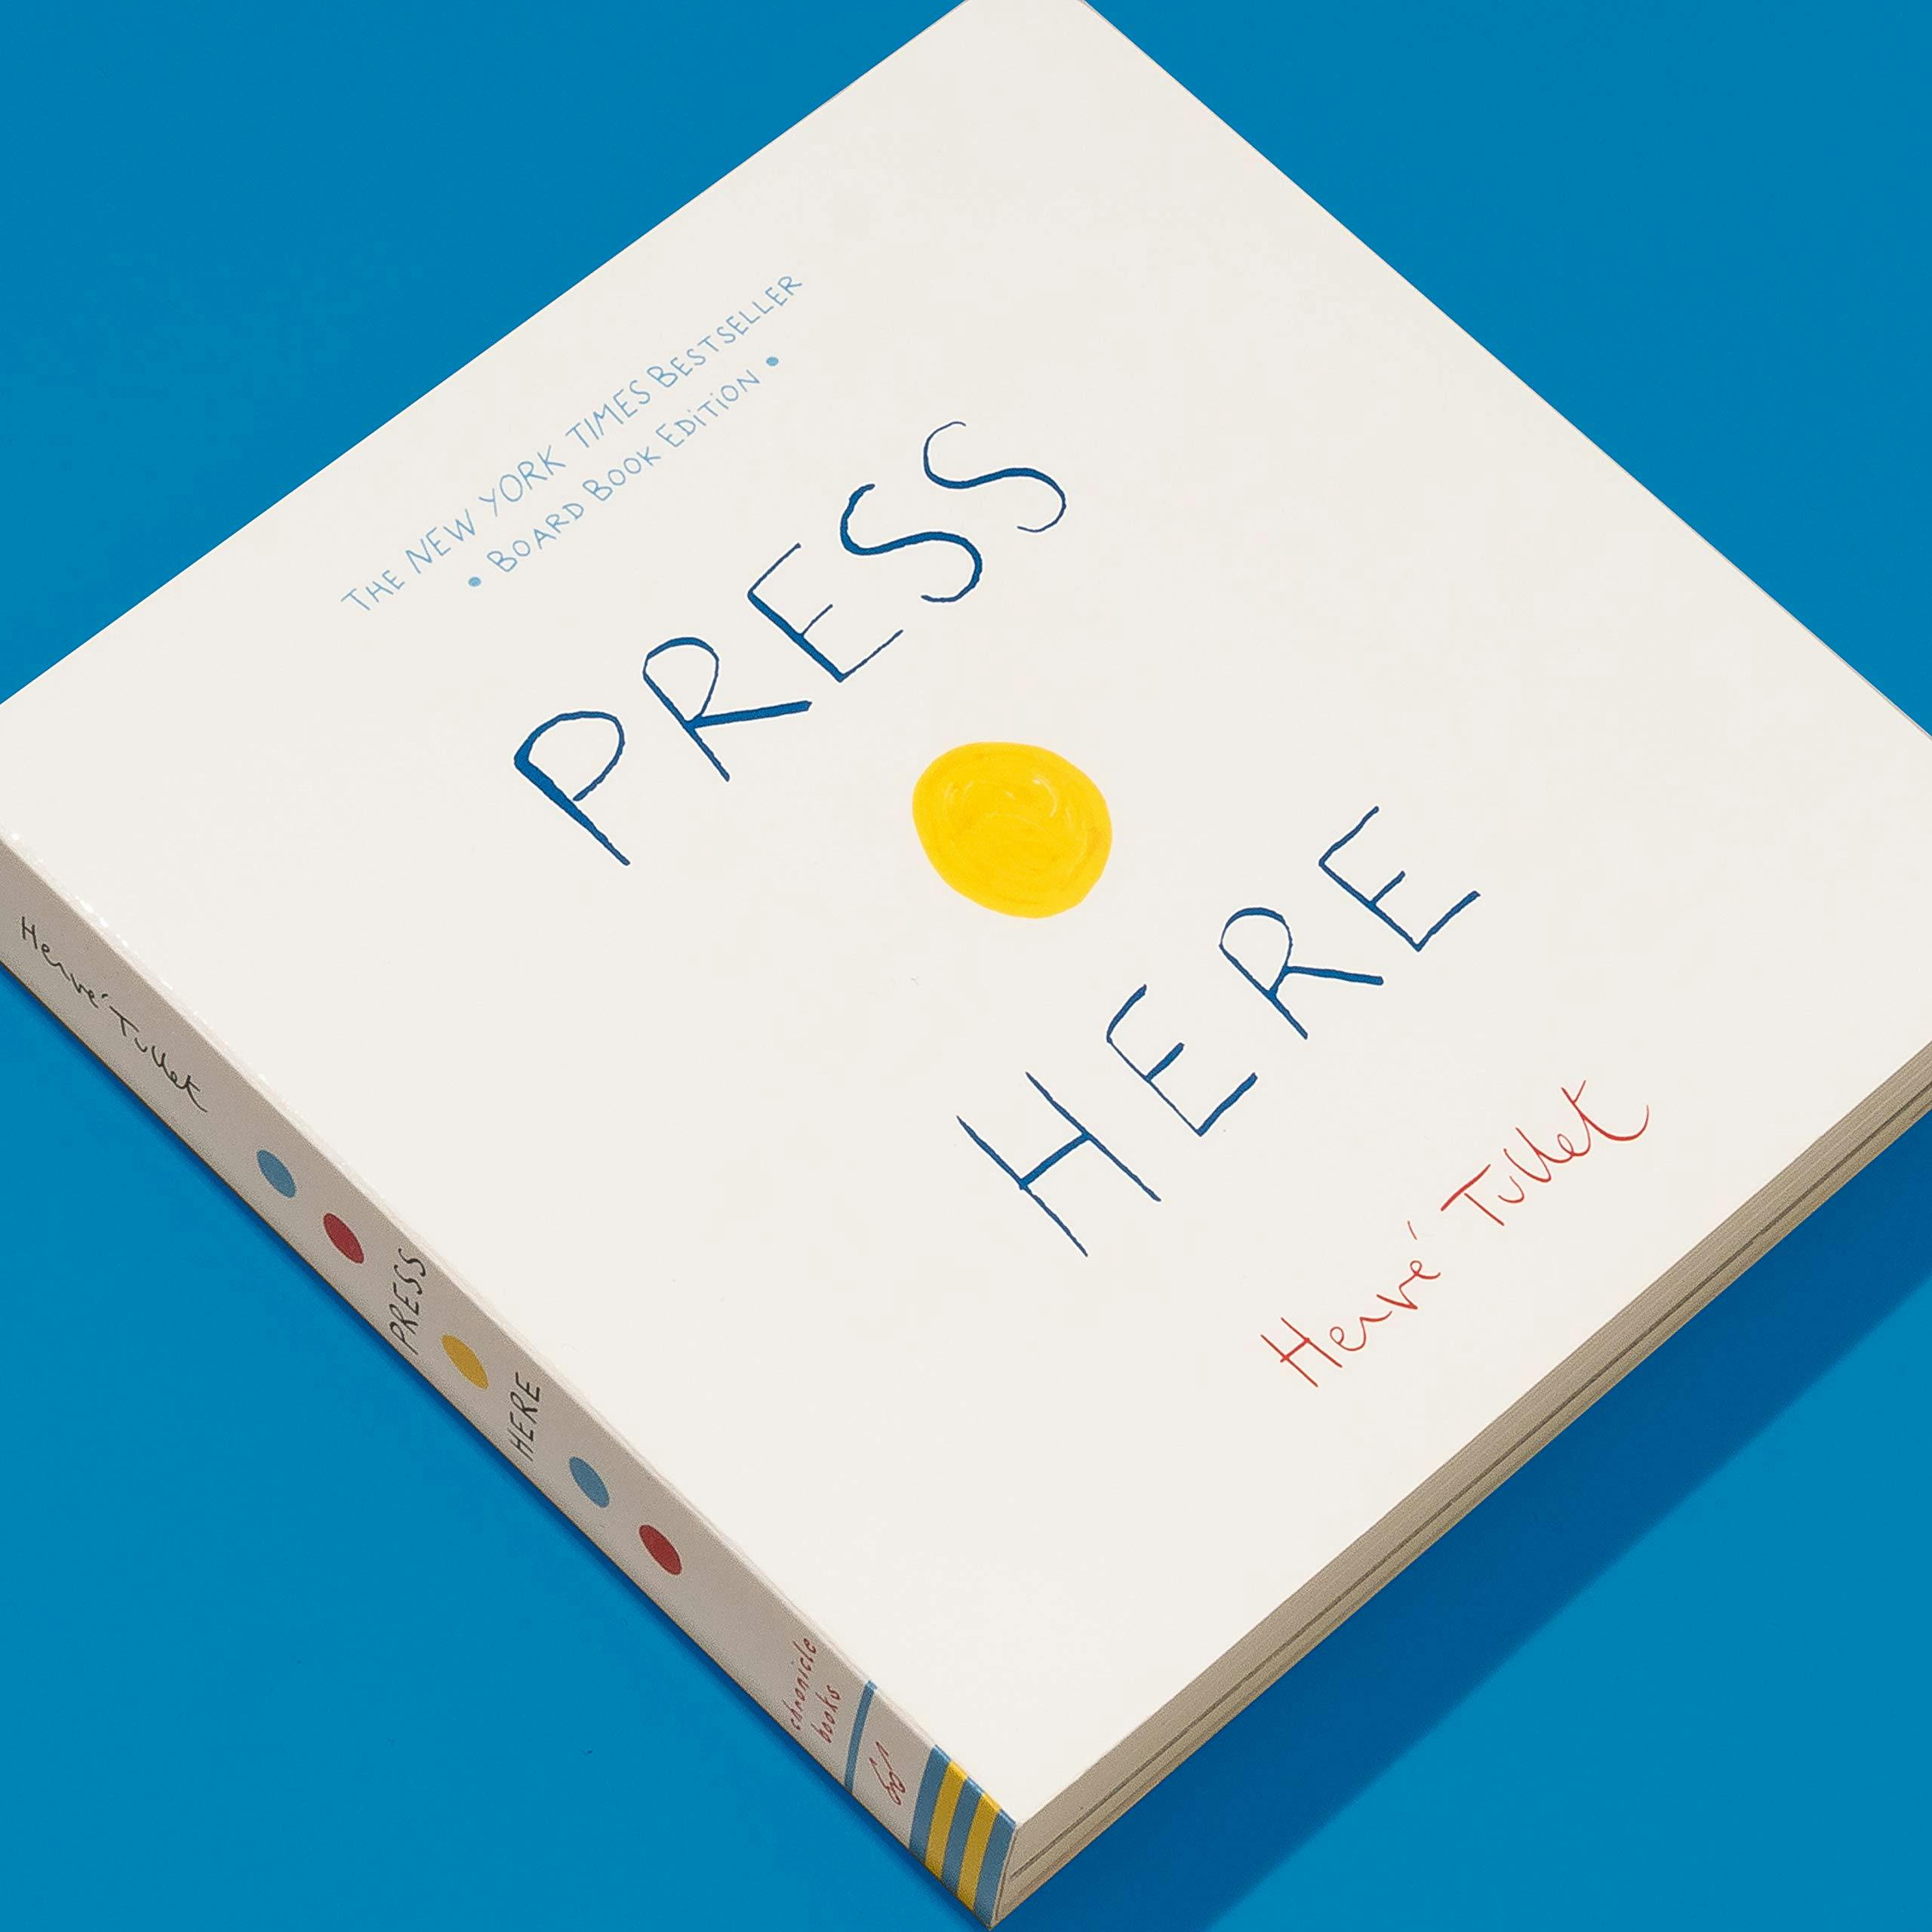 Chronicle Books Press Here by Herve Tullet